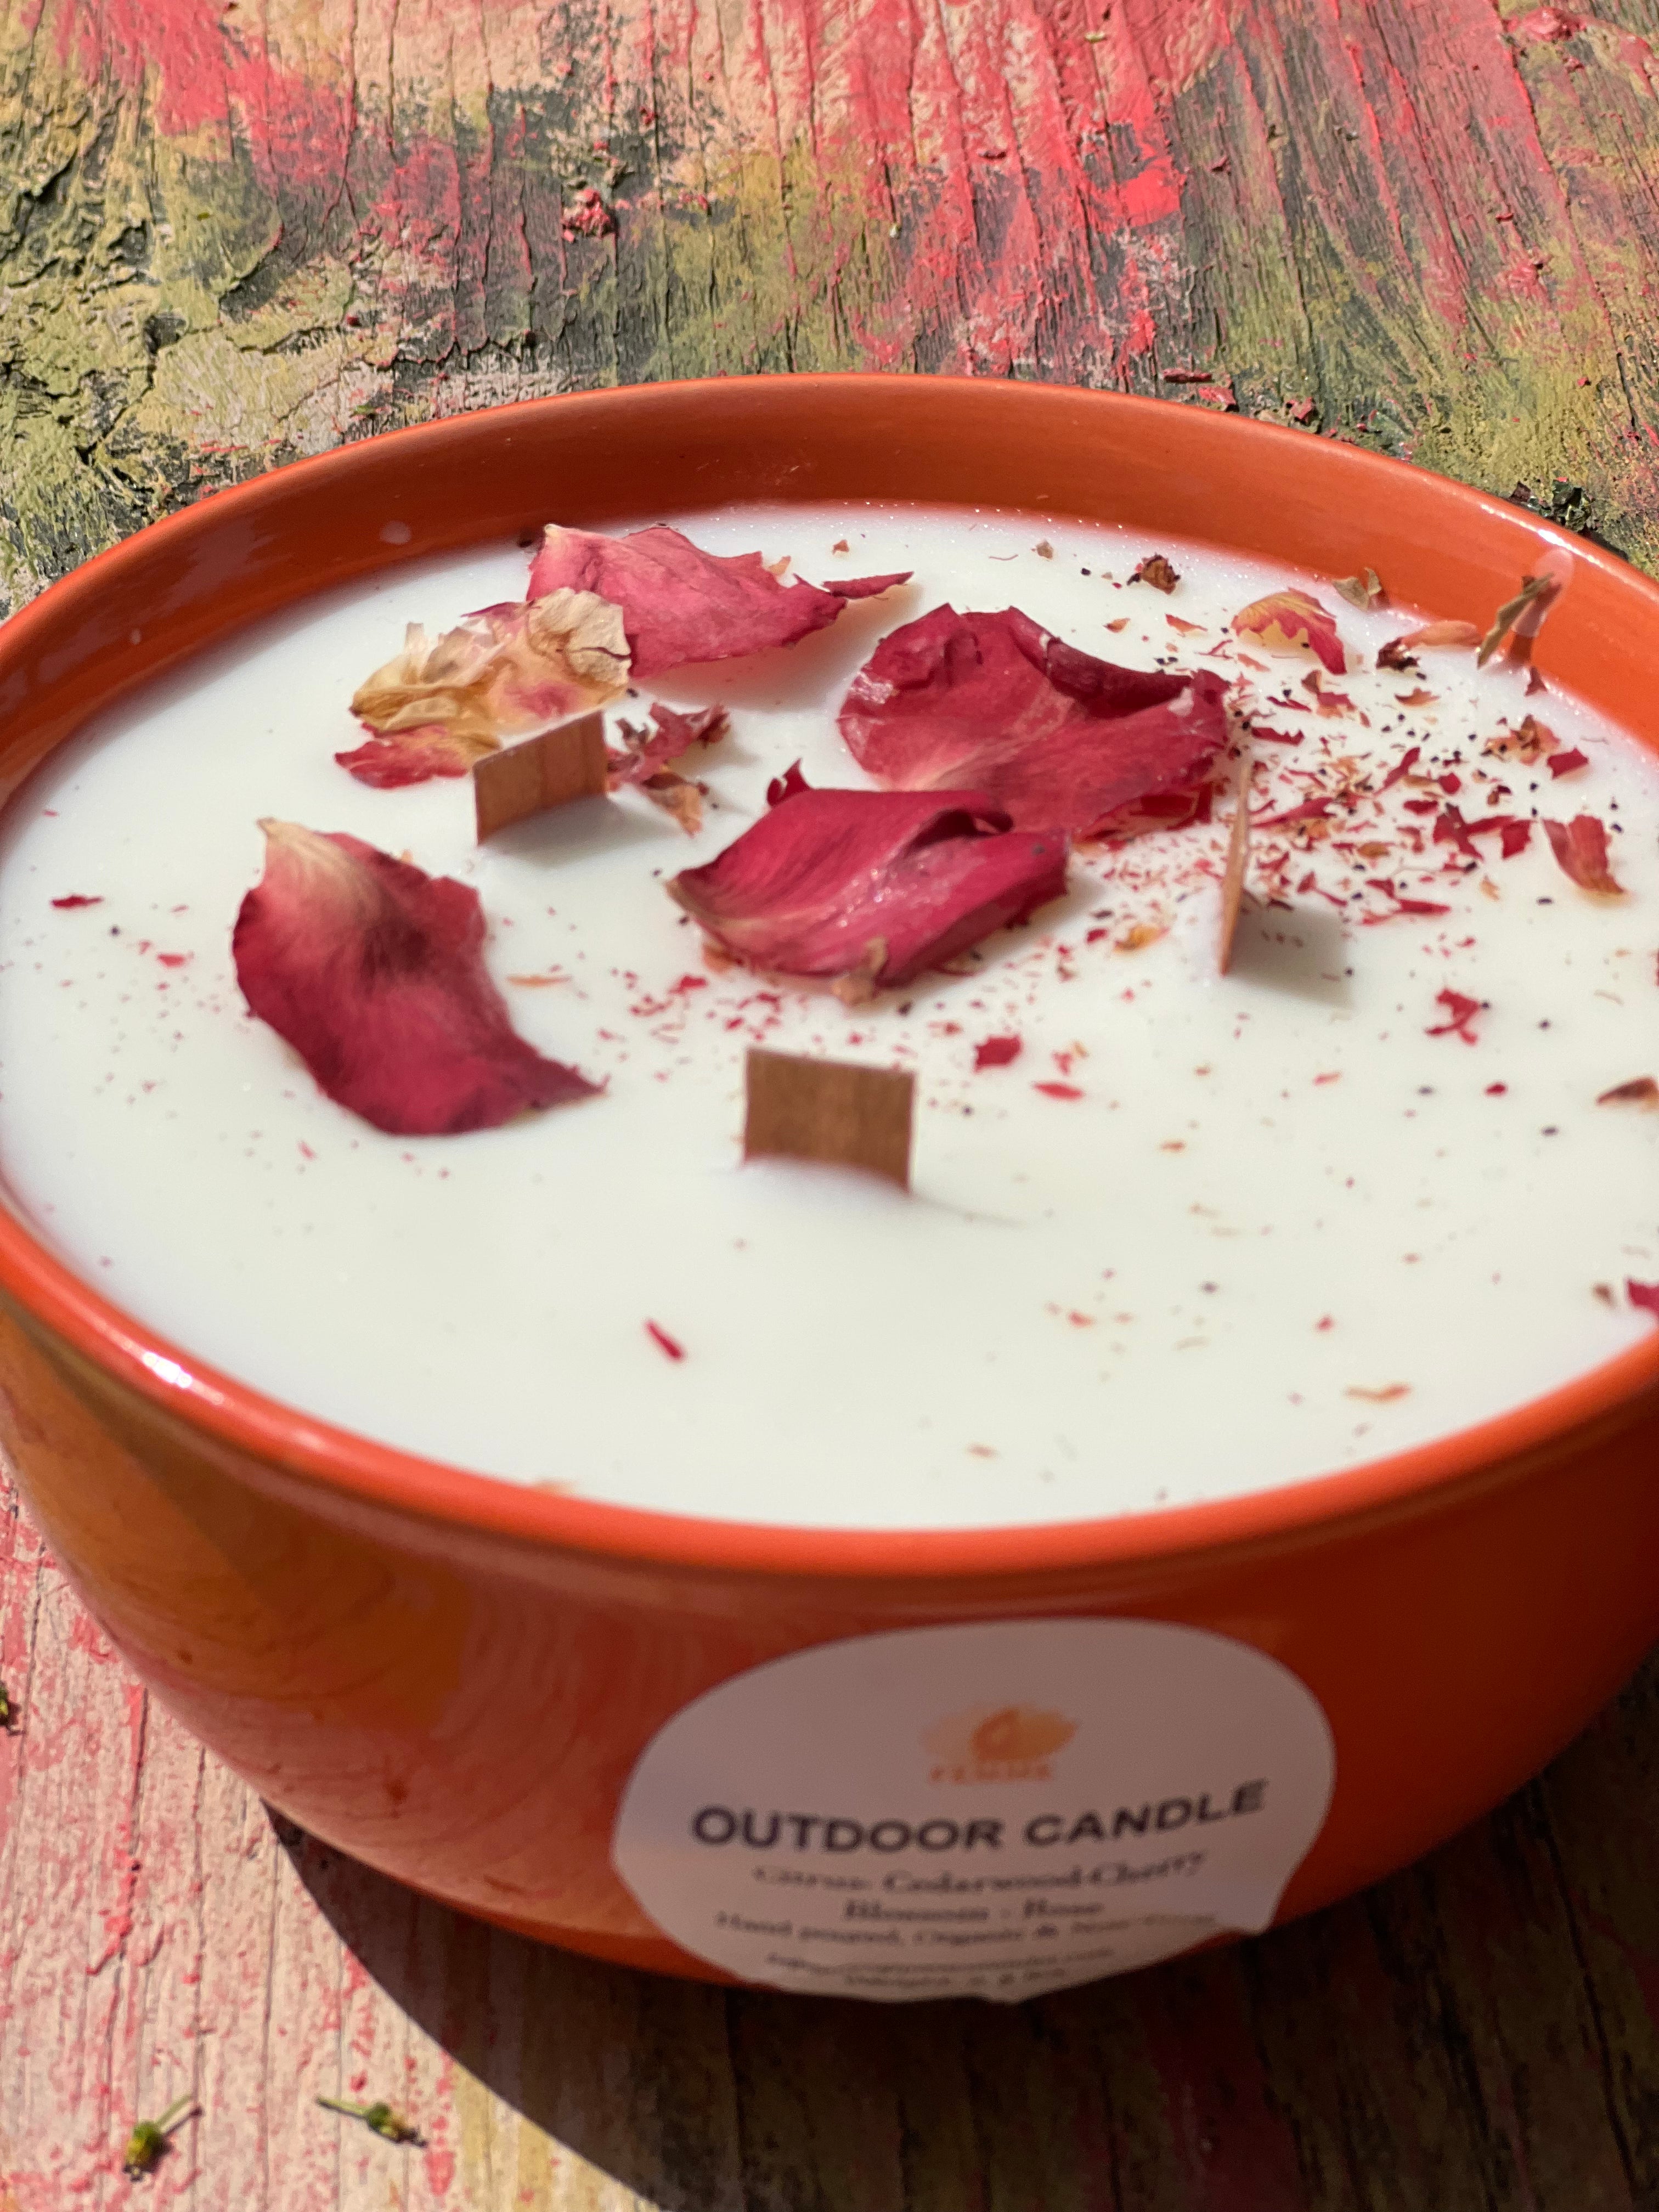 Scented Outdoor Candle with Rose petals